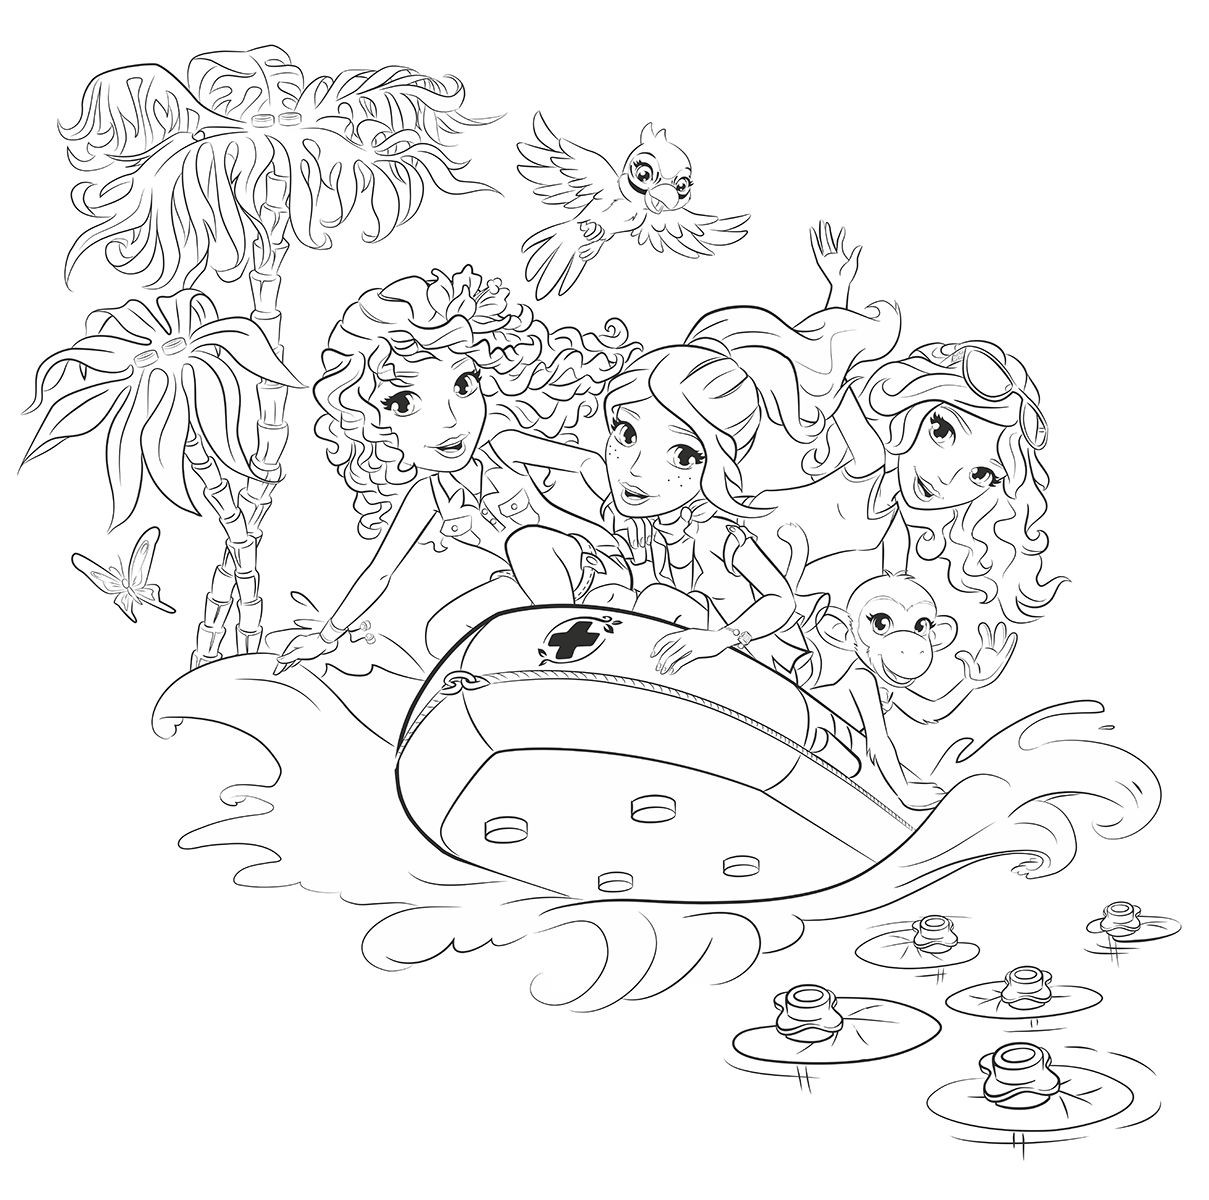 Lego Girls Coloring Pages
 AZ Coloring Tons of Free Coloring Pages